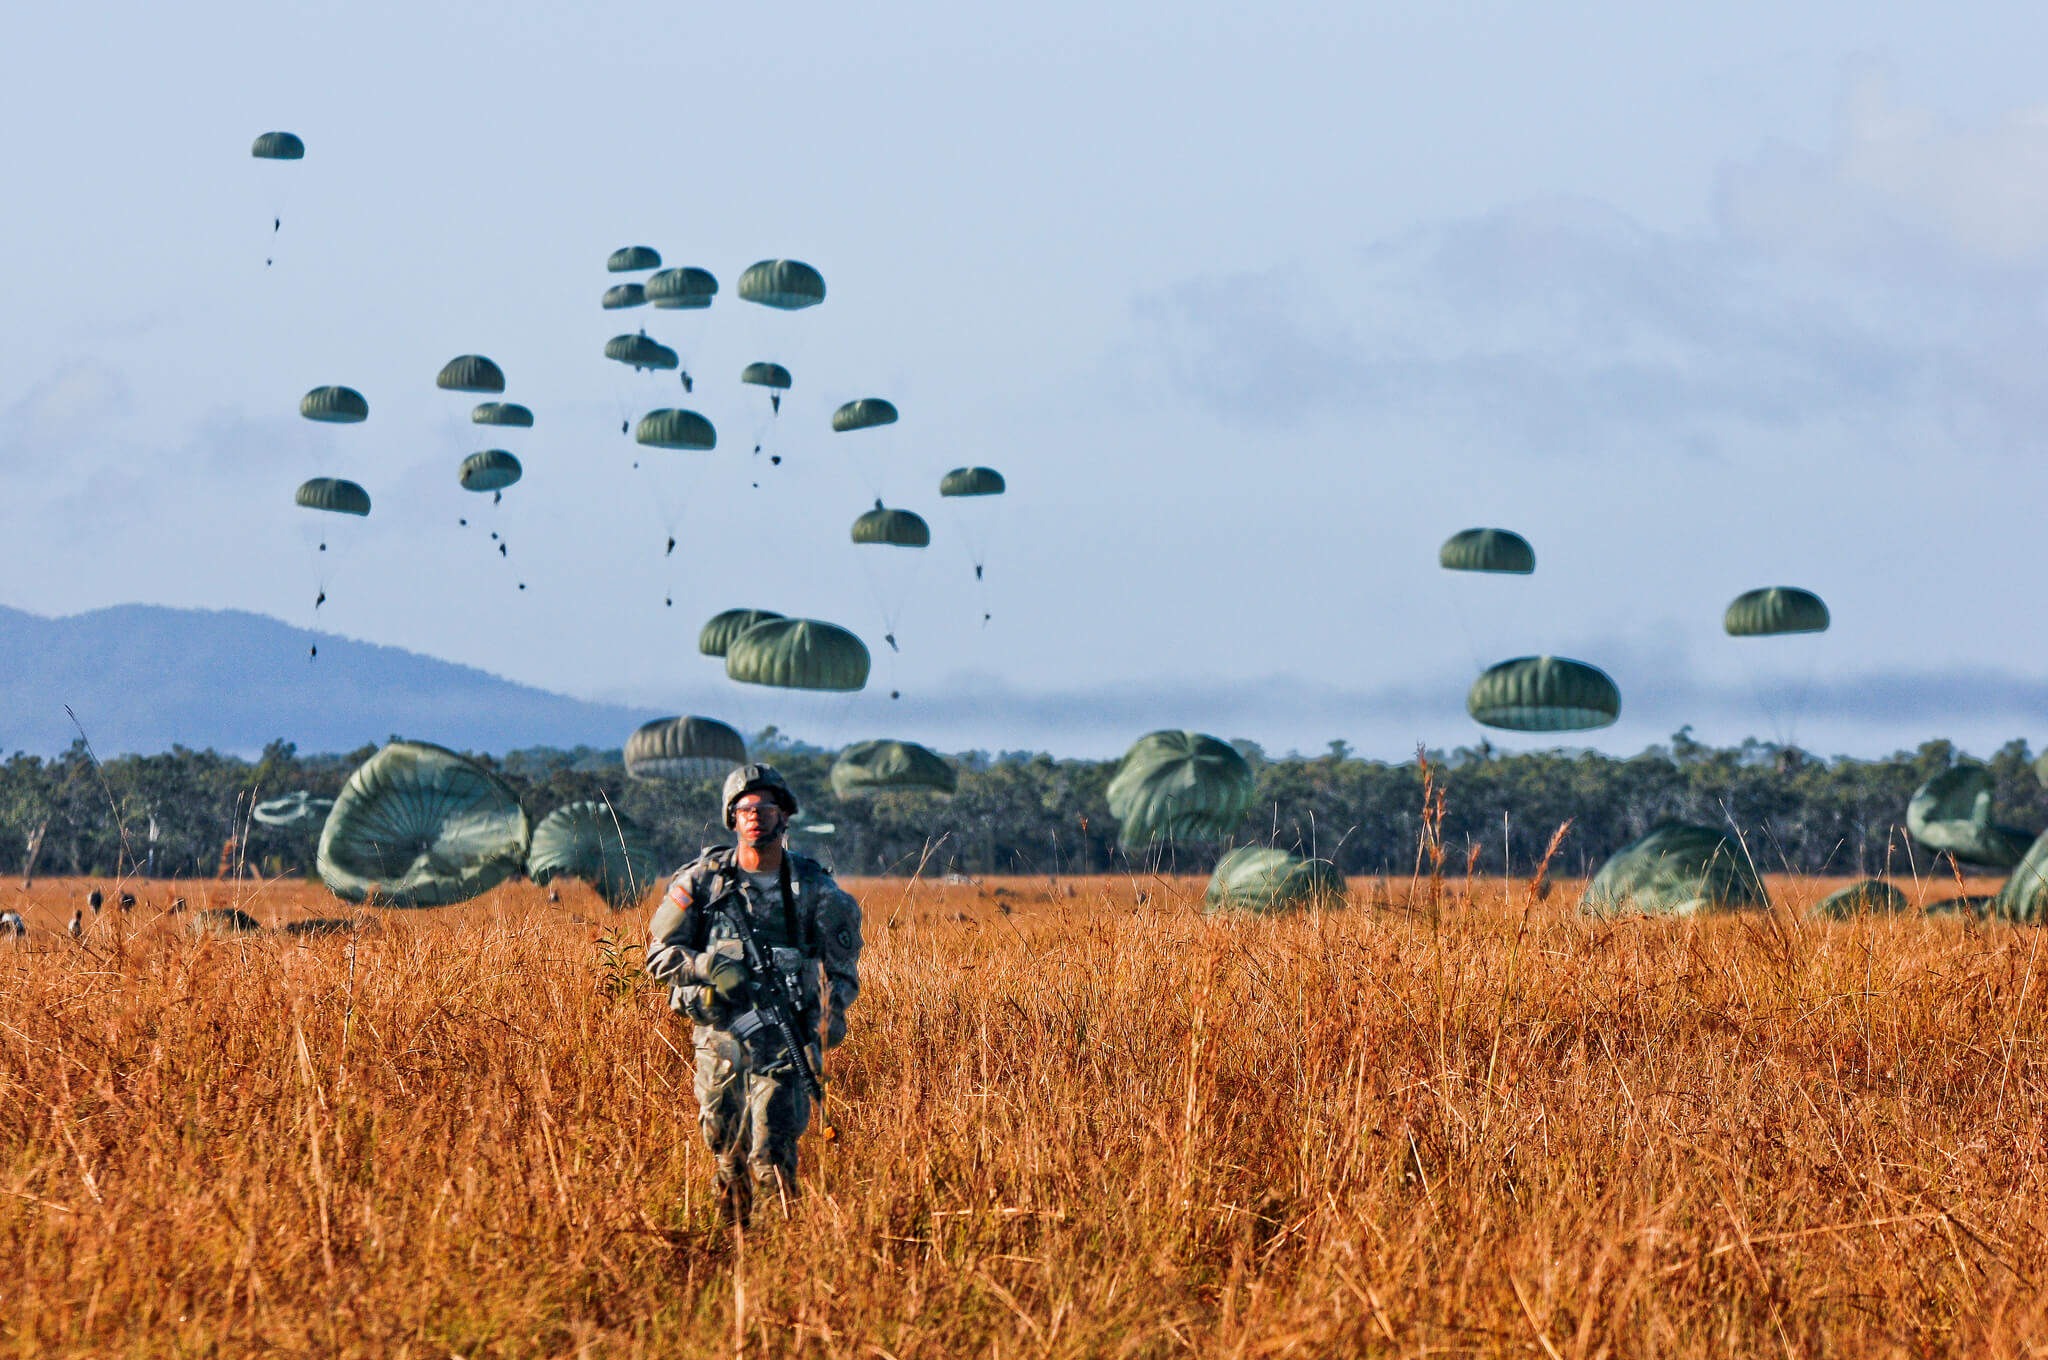 Paratroopers during a joint Australia and US military exercise. © DVIDSHUB / Flickr